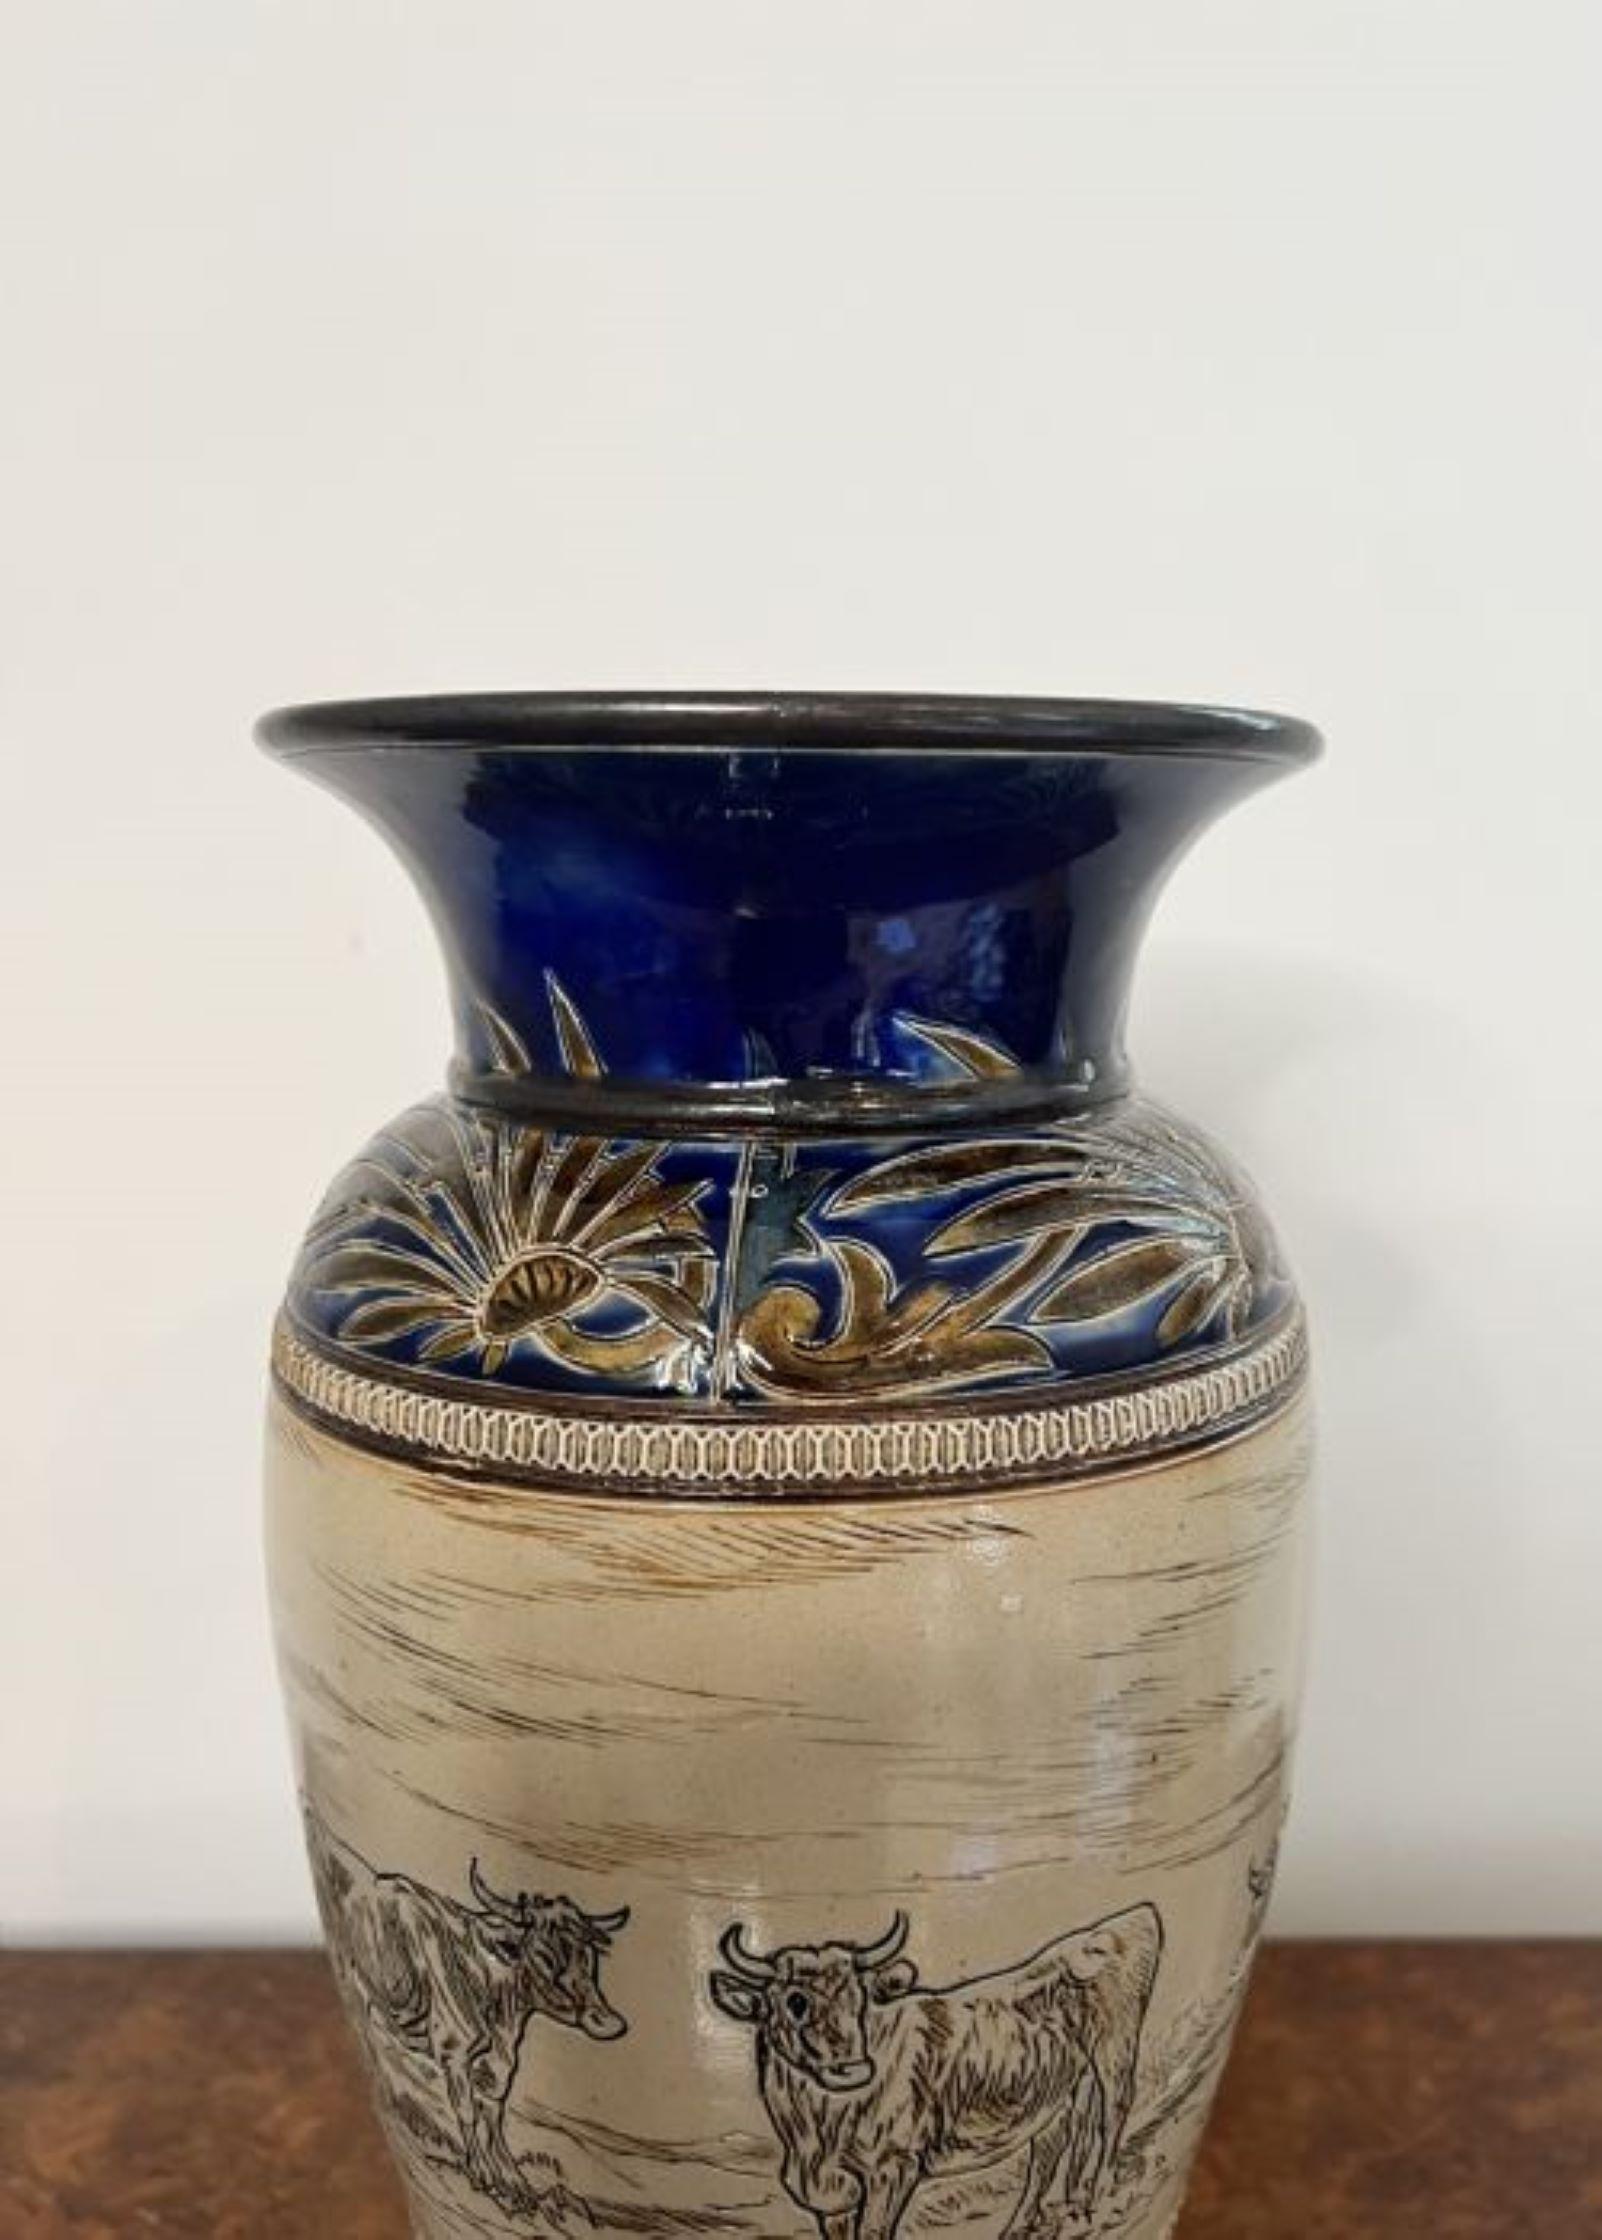 Outstanding quality large antique Doulton Lambeth vase by Hannah Barlow having an outstanding quality antique Doulton lambeth vase by Hannah Barlow beautifully decorated to the centre with cattle and landscape outlined in a dark colour on a light